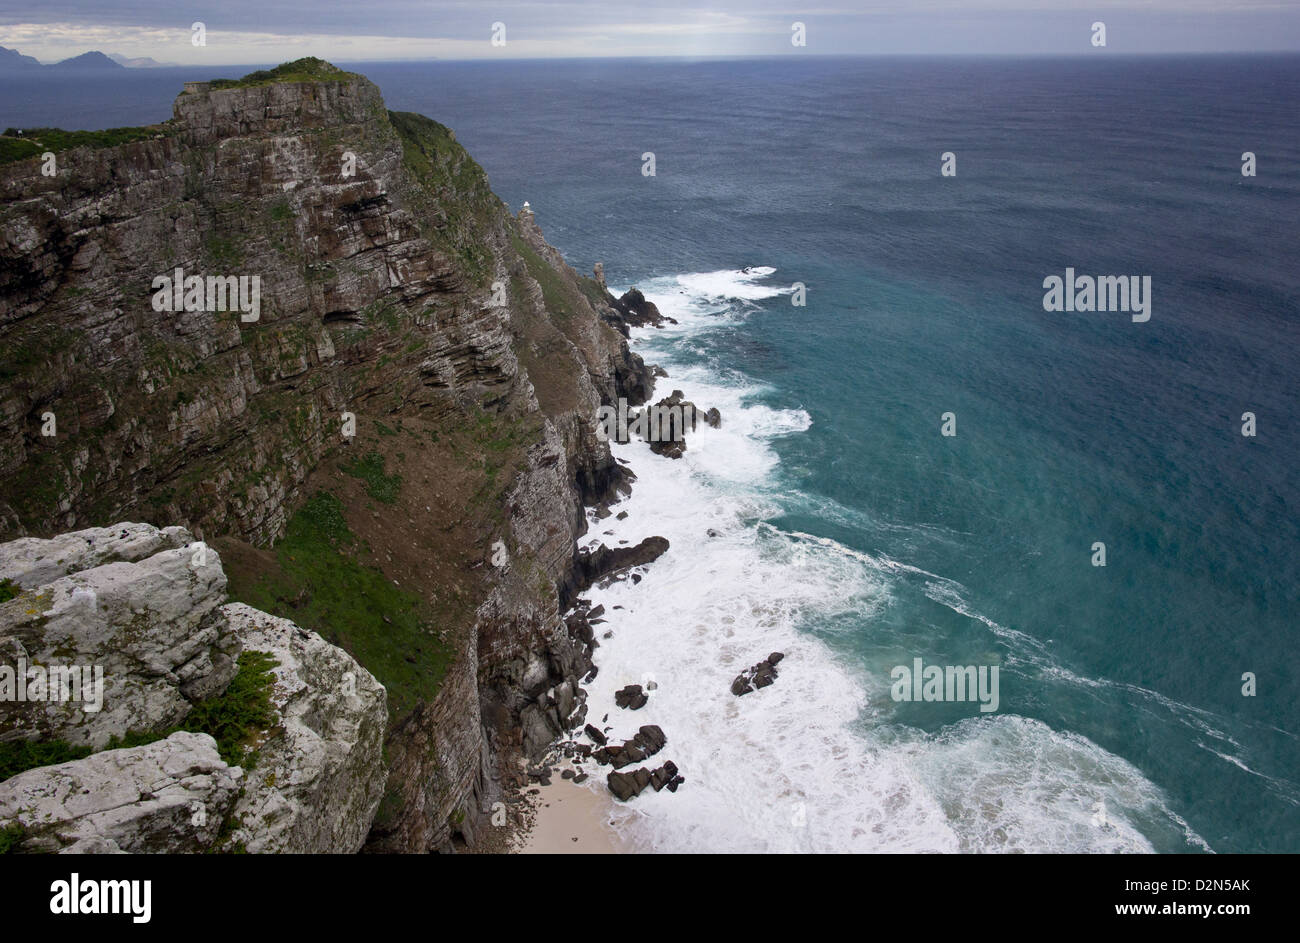 The high cliffs at Cape Point, Table Mountain National Park, South Africa Stock Photo